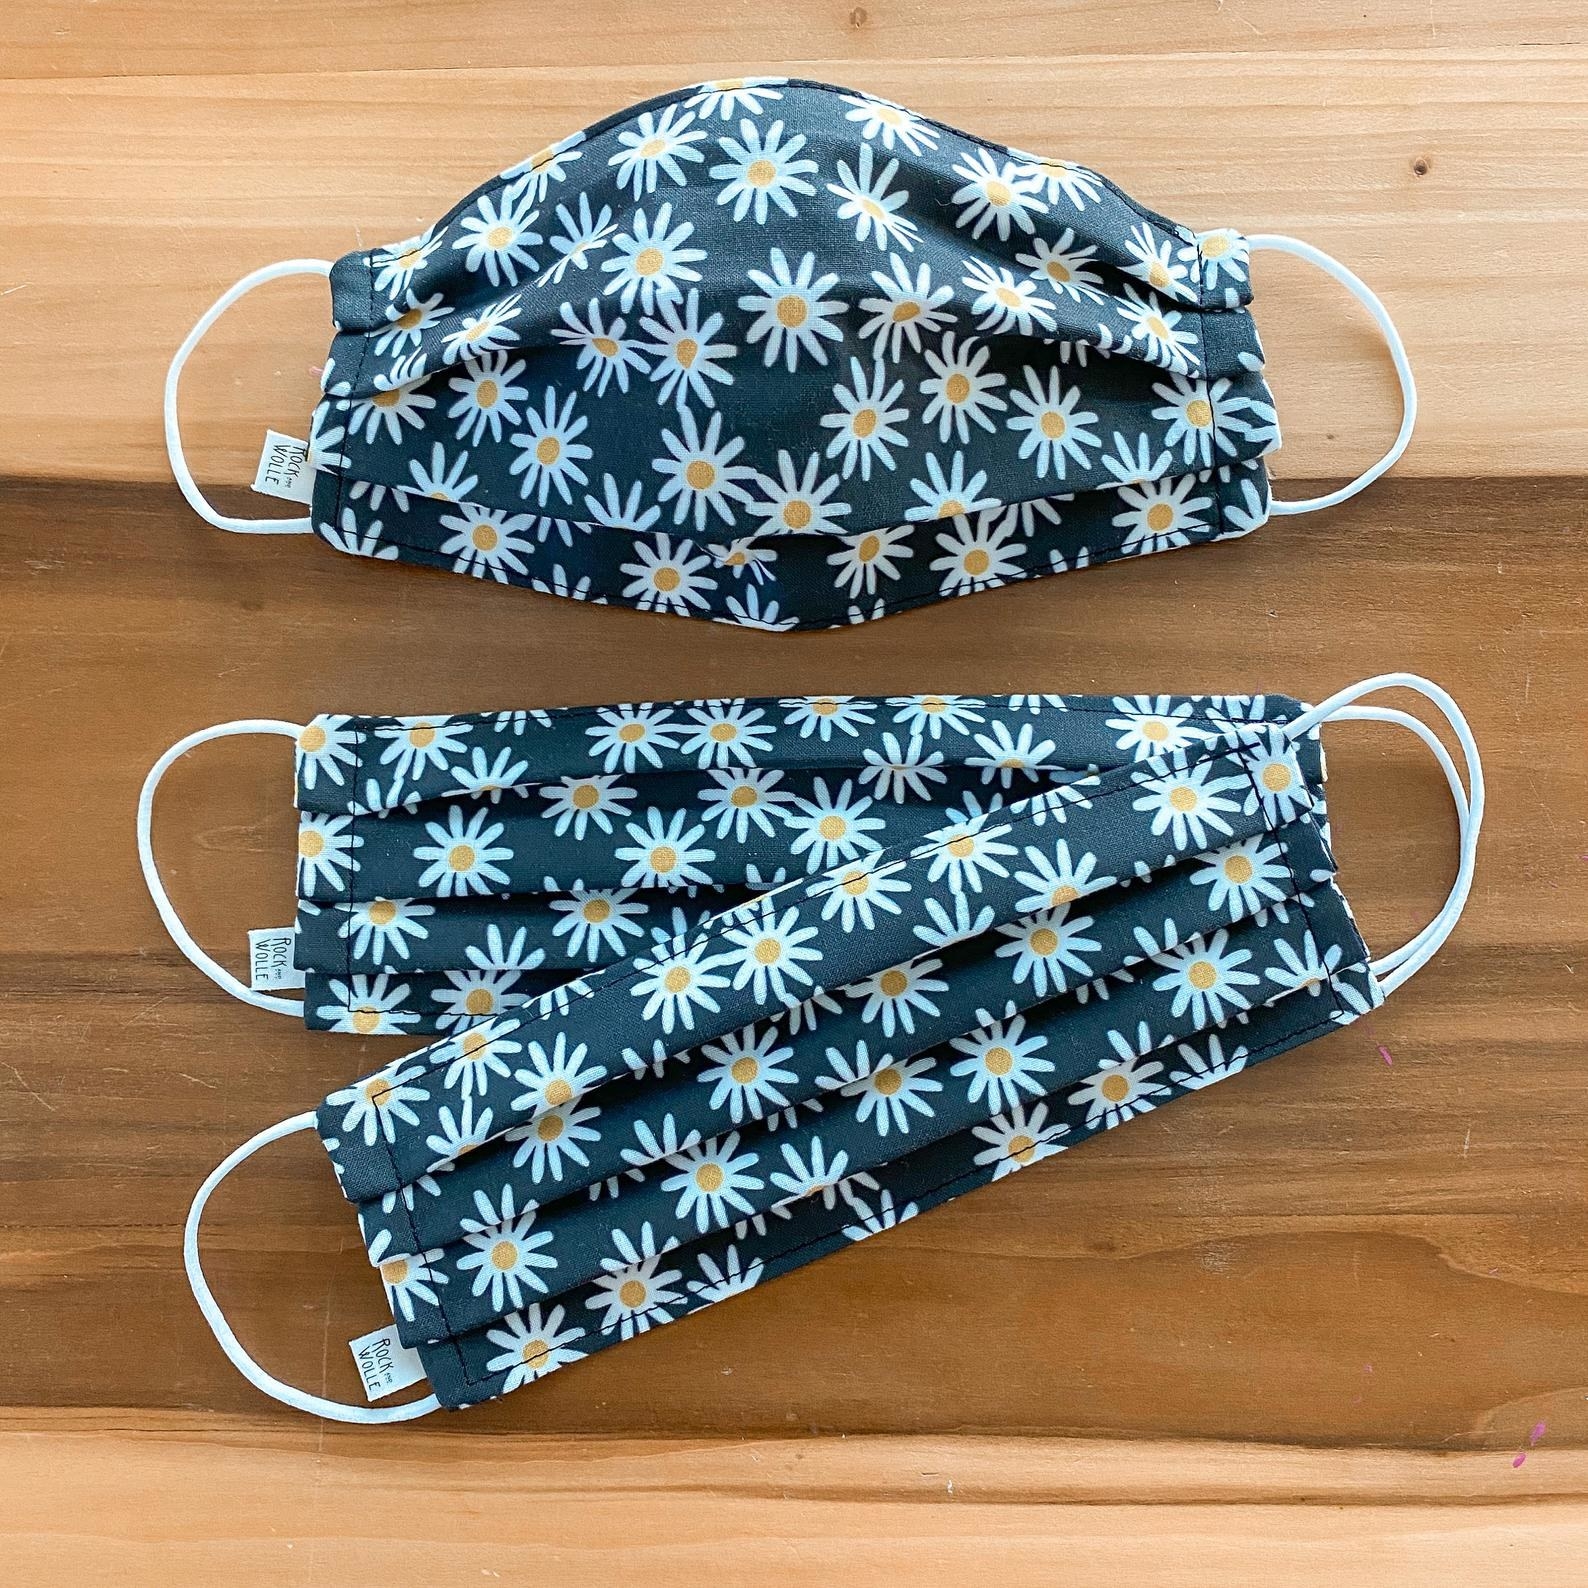 two gray non medical face masks with a white daisy print all over